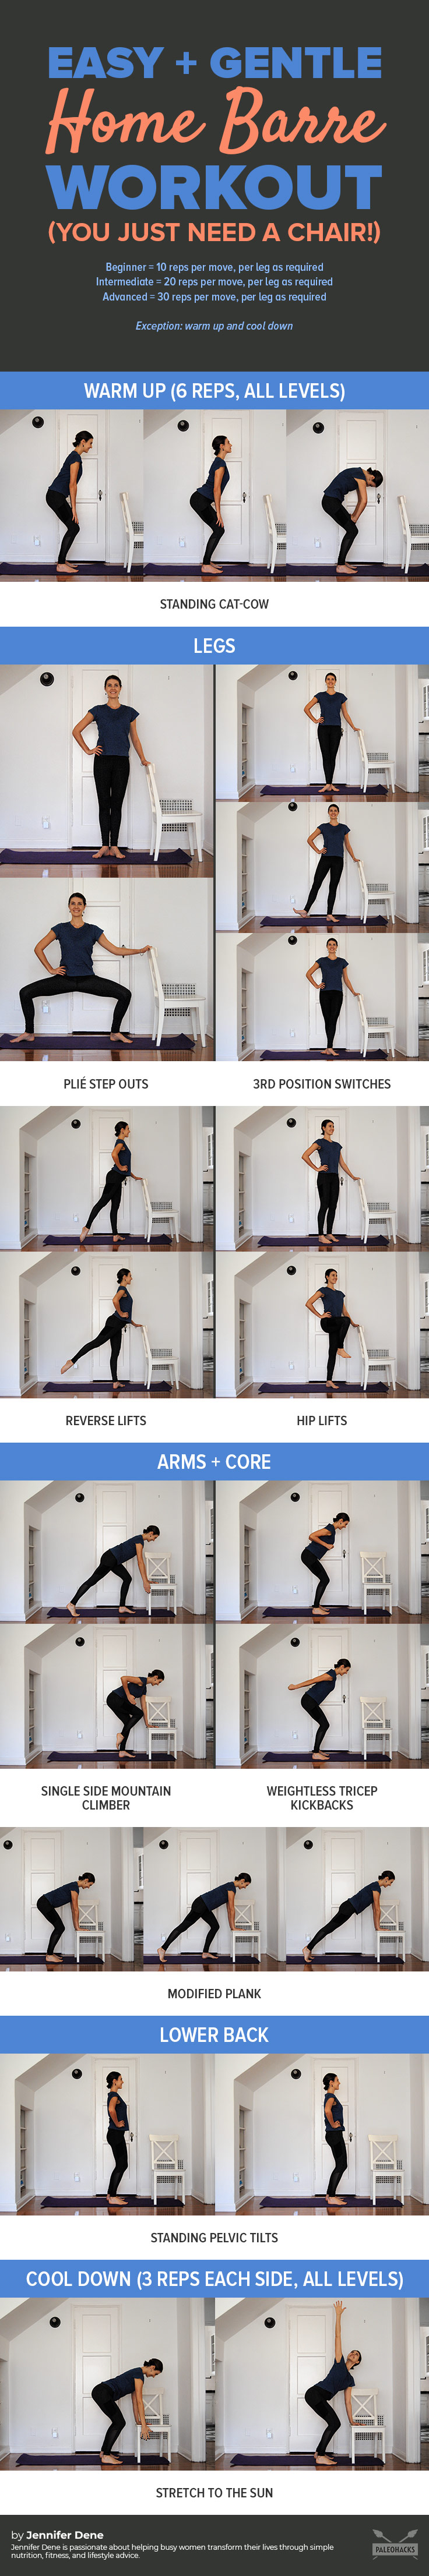 Interested in barre? Grab a chair and try this ballet-inspired barre workout in the comfort of your own home.